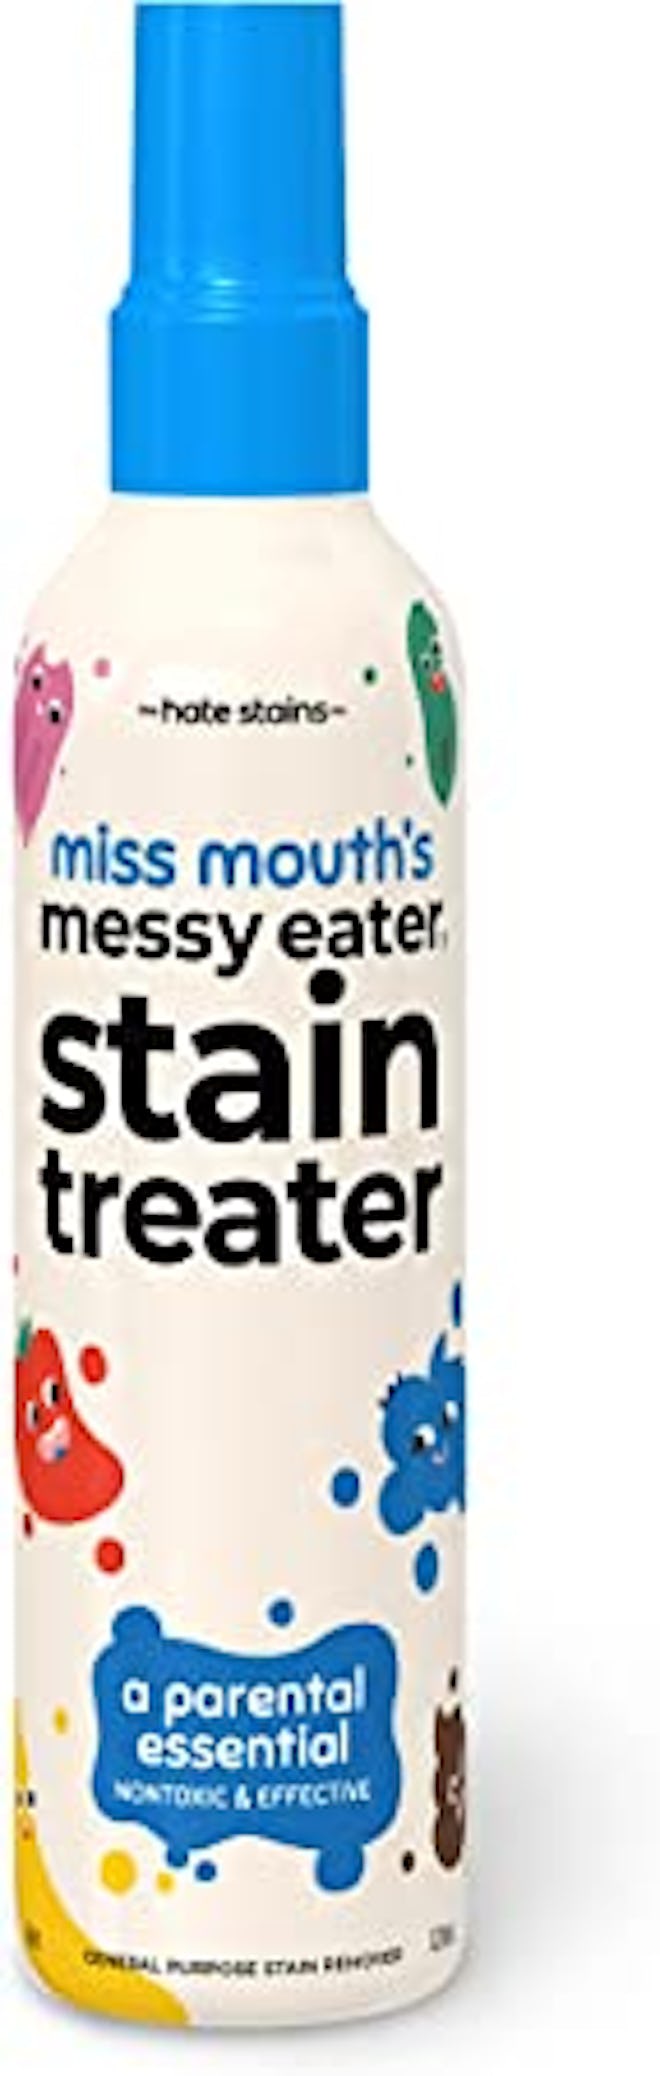 Messy Eater Spot Cleaner for Clothing, Fabric, Carpet